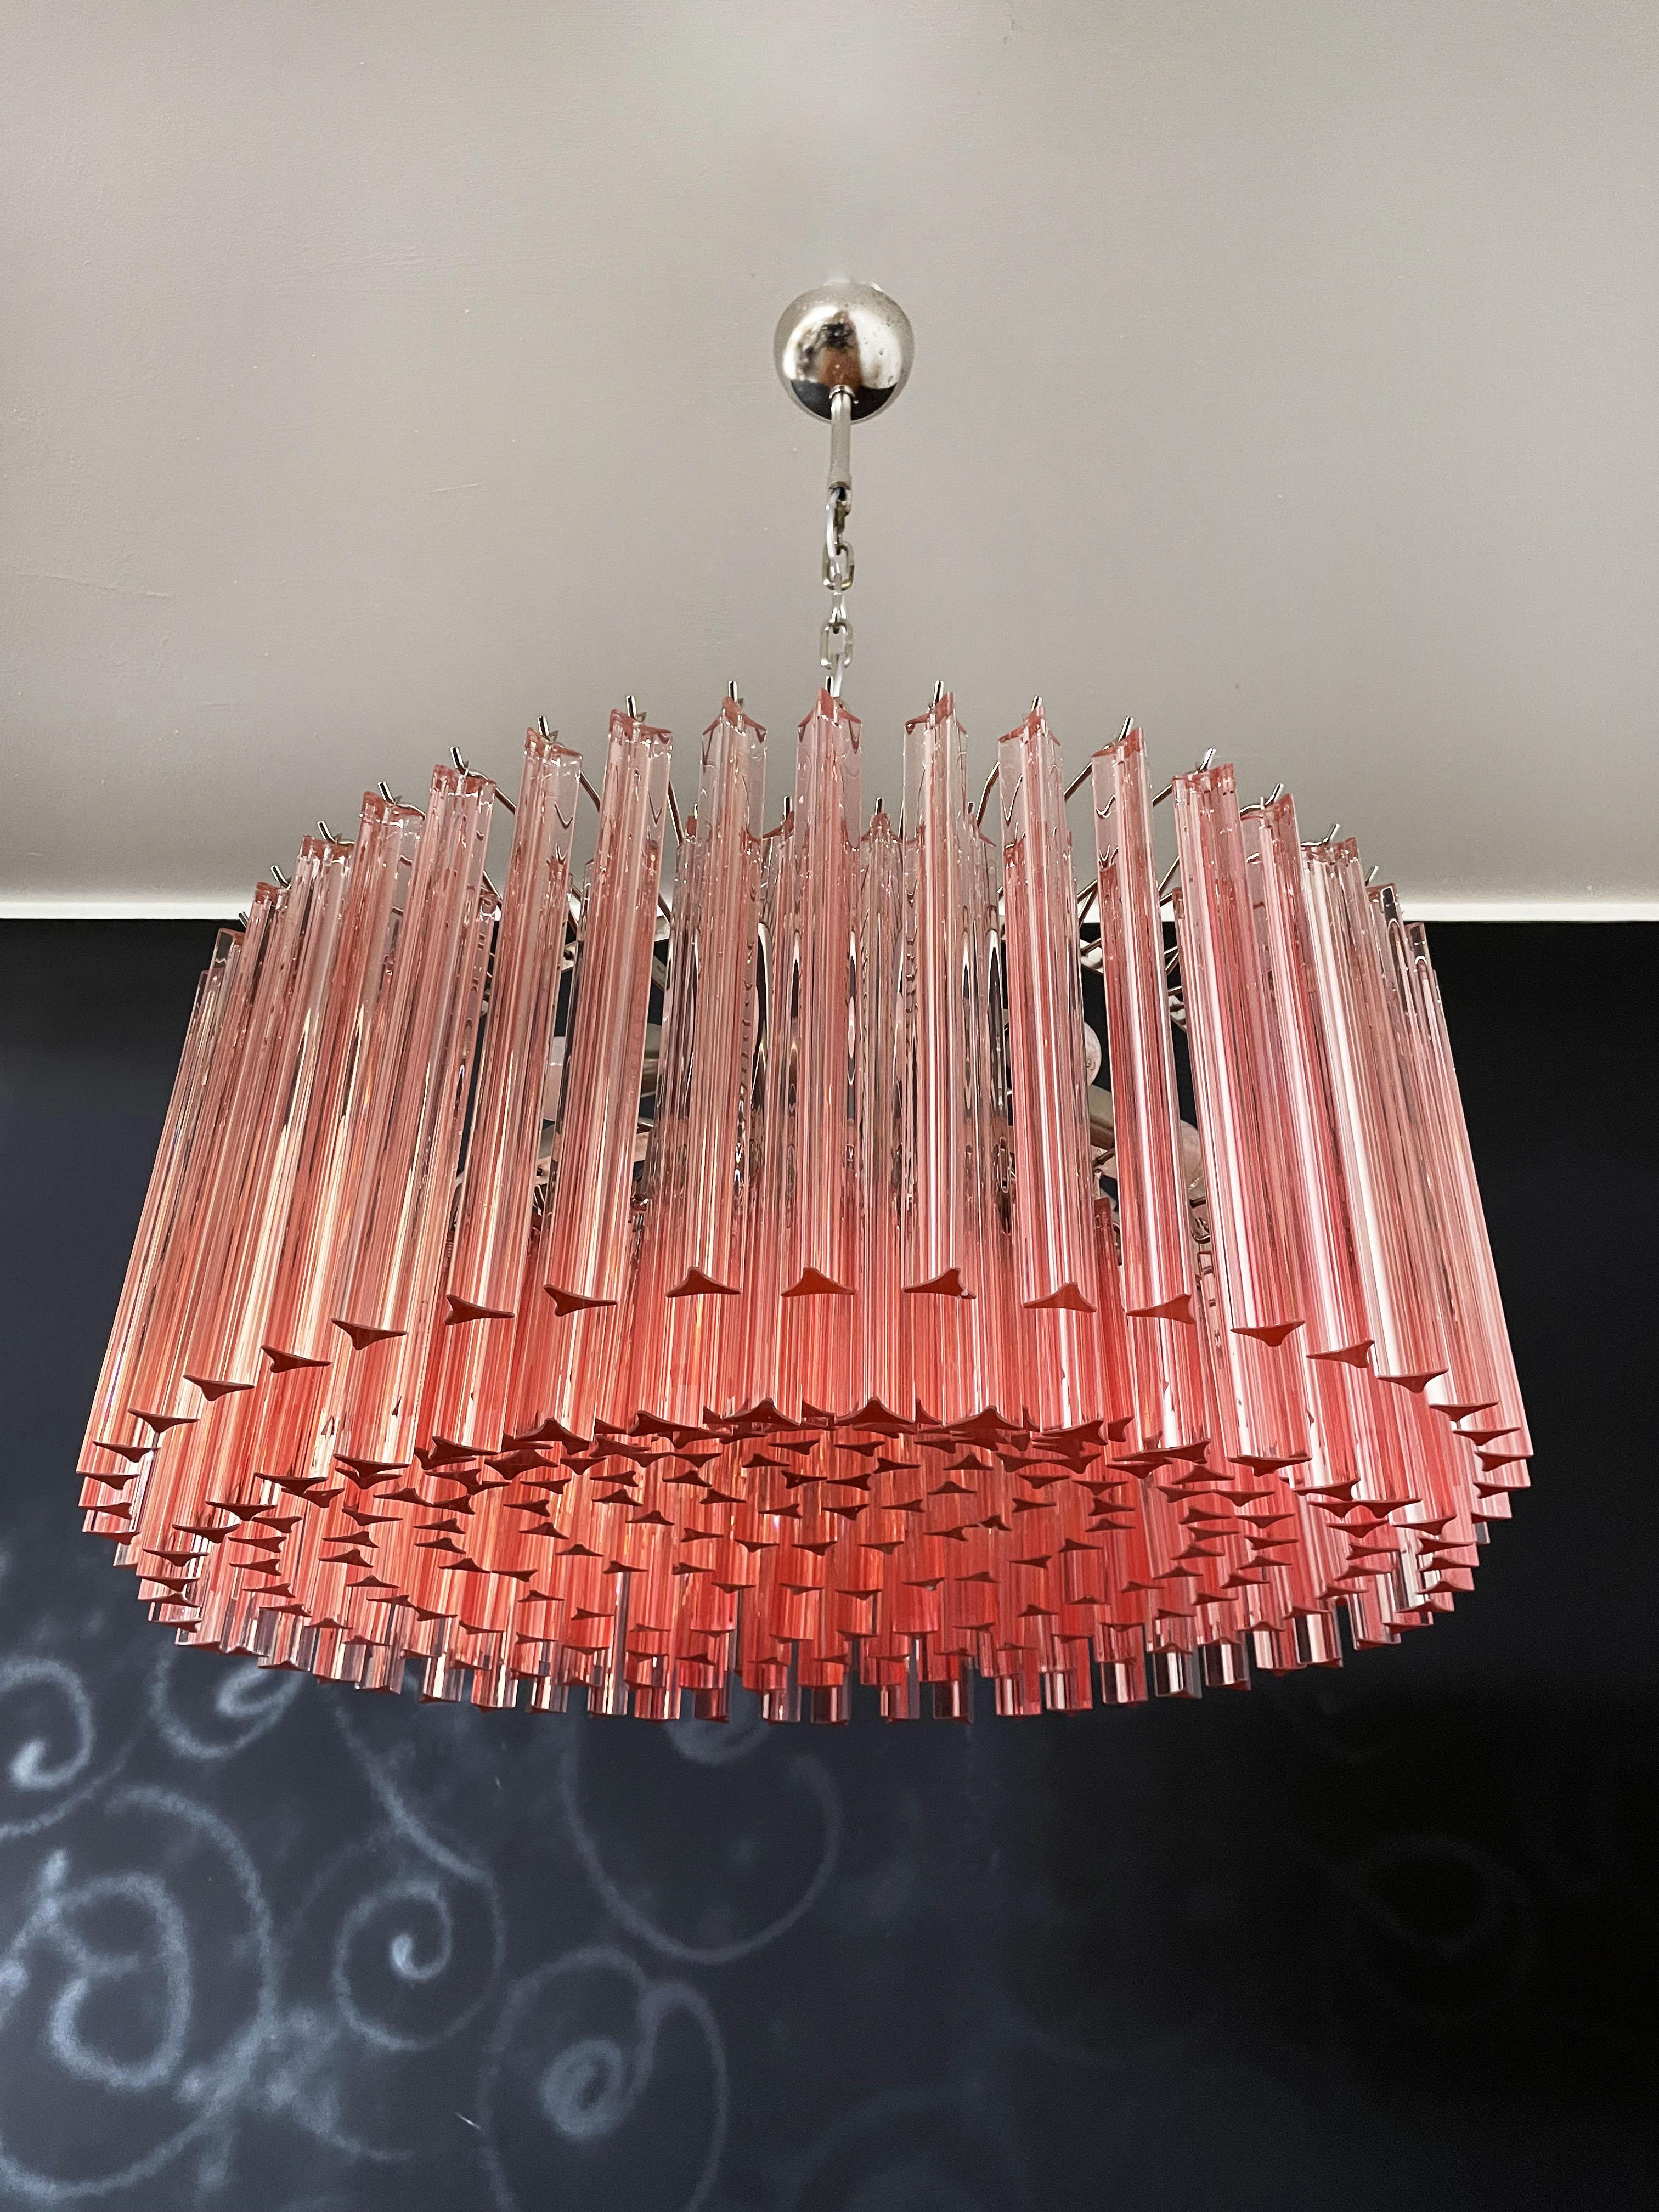 A magnificent Murano glass chandelier, 265 pink triedri on crome frame. This large Mid-Century Italian chandelier is truly a timeless classic.
Period: late XX century
Dimensions: 43,30 inches (110 cm) height with chain; 15,75 inches (40 cm) height